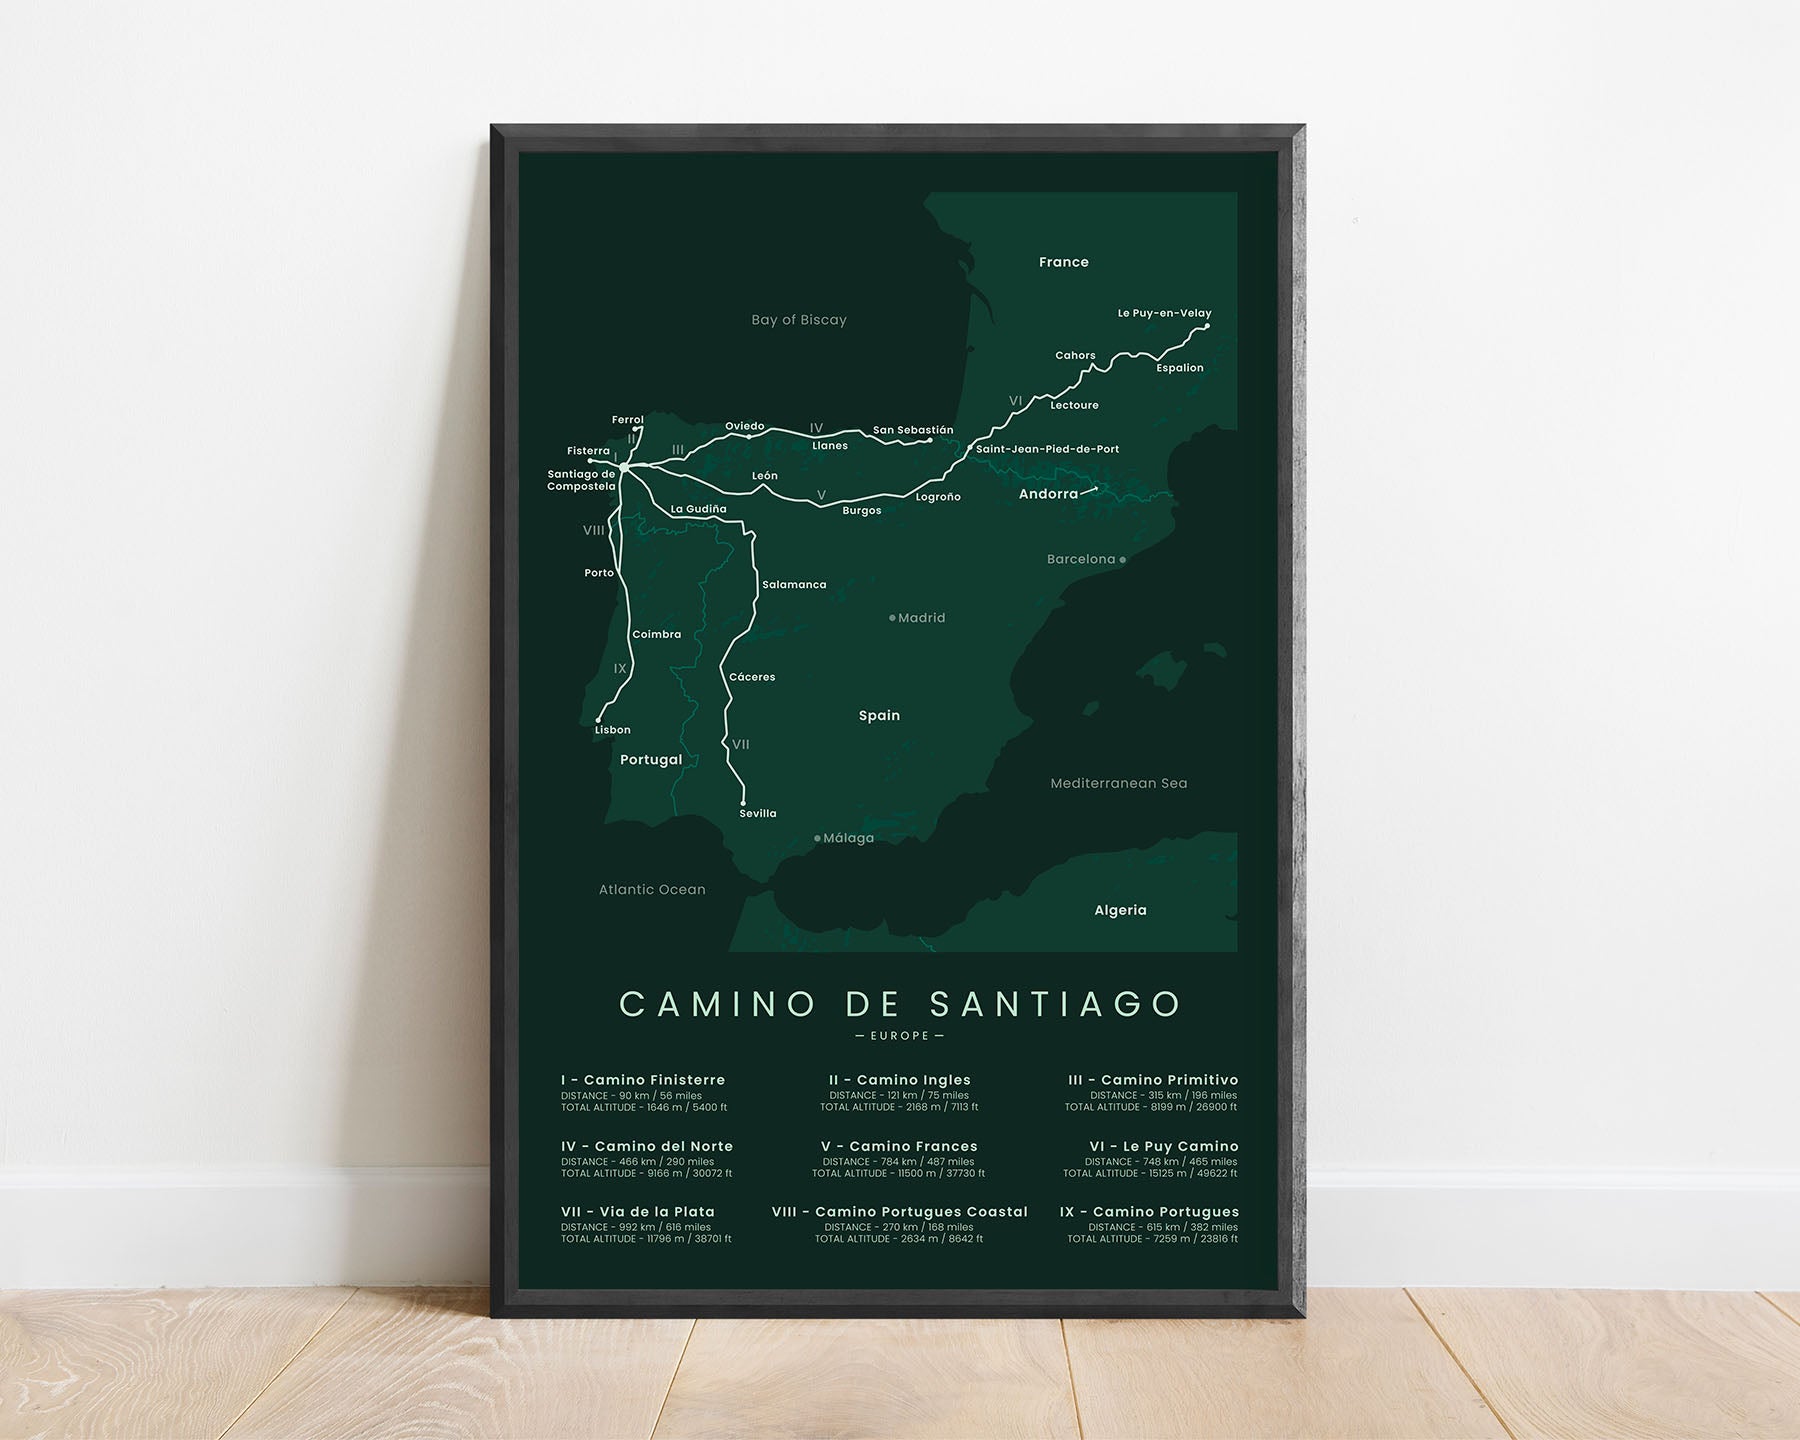 Way of Saint James (Via Podiensis) trail wall map with green background